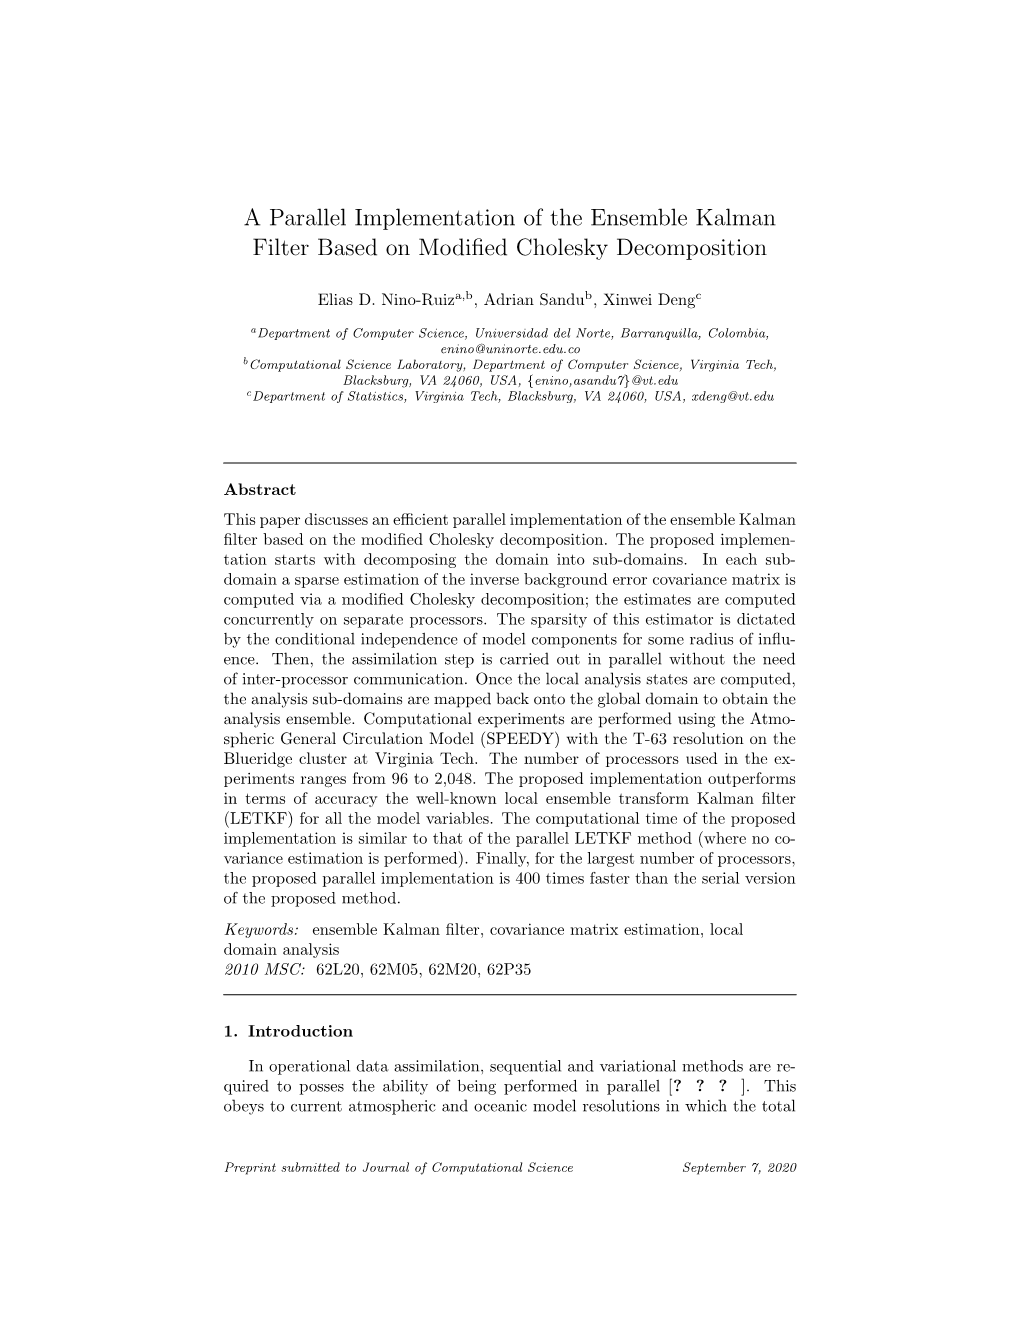 A Parallel Implementation of the Ensemble Kalman Filter Based on Modiﬁed Cholesky Decomposition